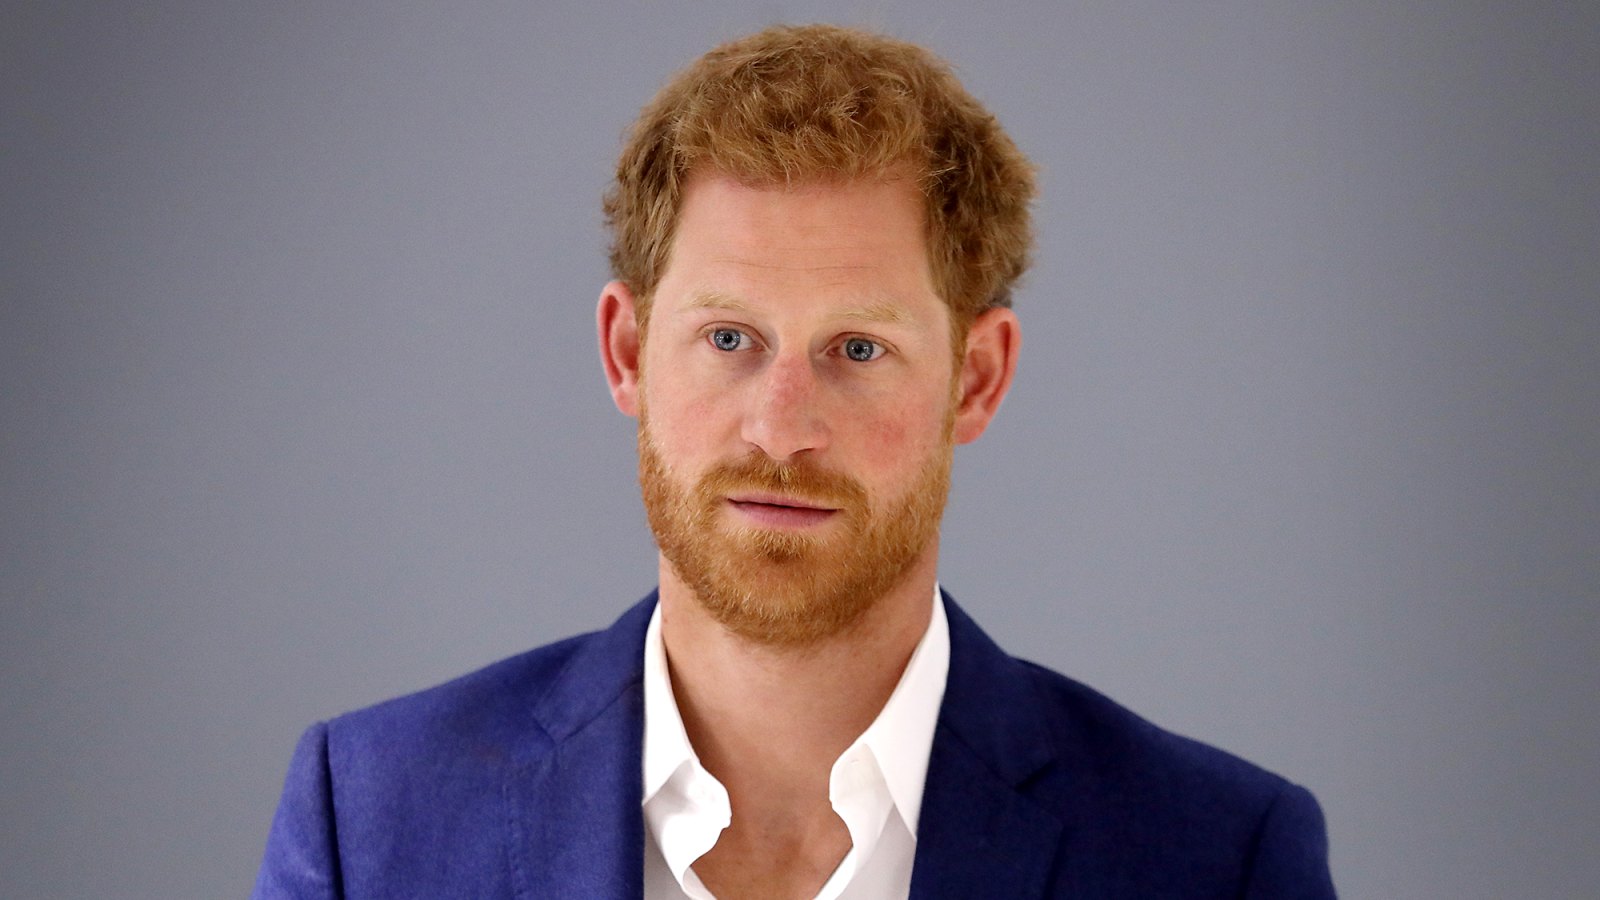 Prince Harry Admits to Past Cocaine Use, Reveals He Lost His Virginity In a ‘Grassy Field Behind a Busy Pub’